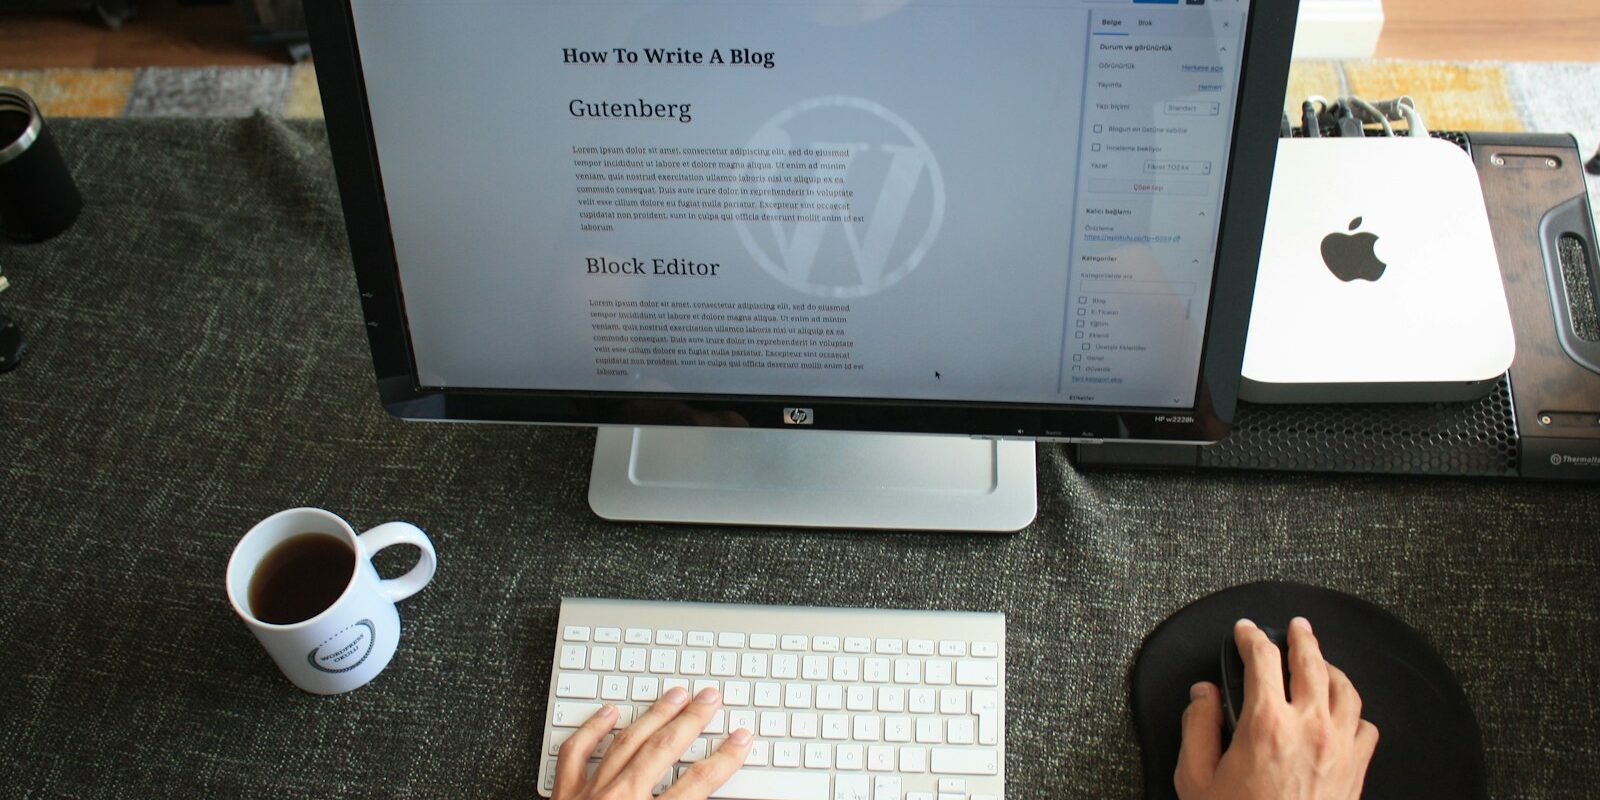 computer monitor showing a wordpress website on the screen with hands on the keyboard and mouse.